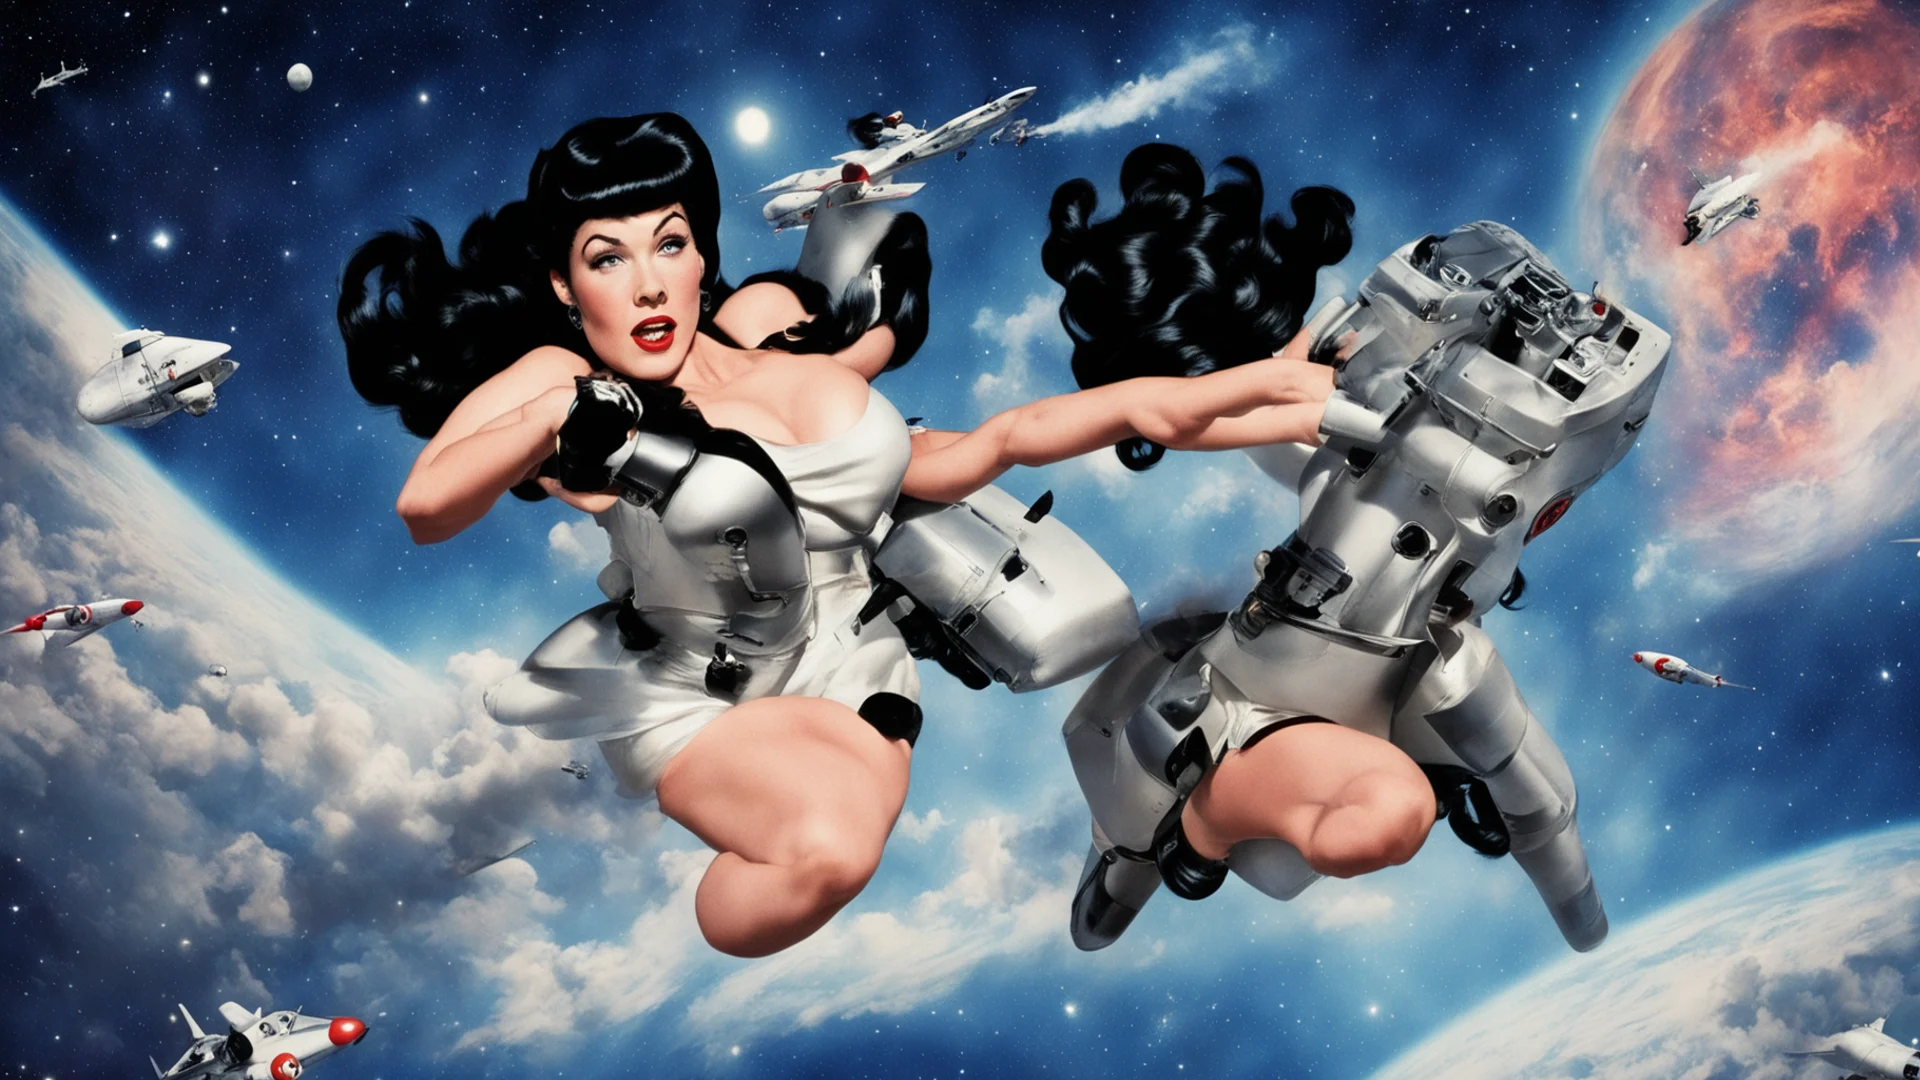 bettie page as a b movie space traveller flying through space with a jet pack amazing awesome portrait 2 wide